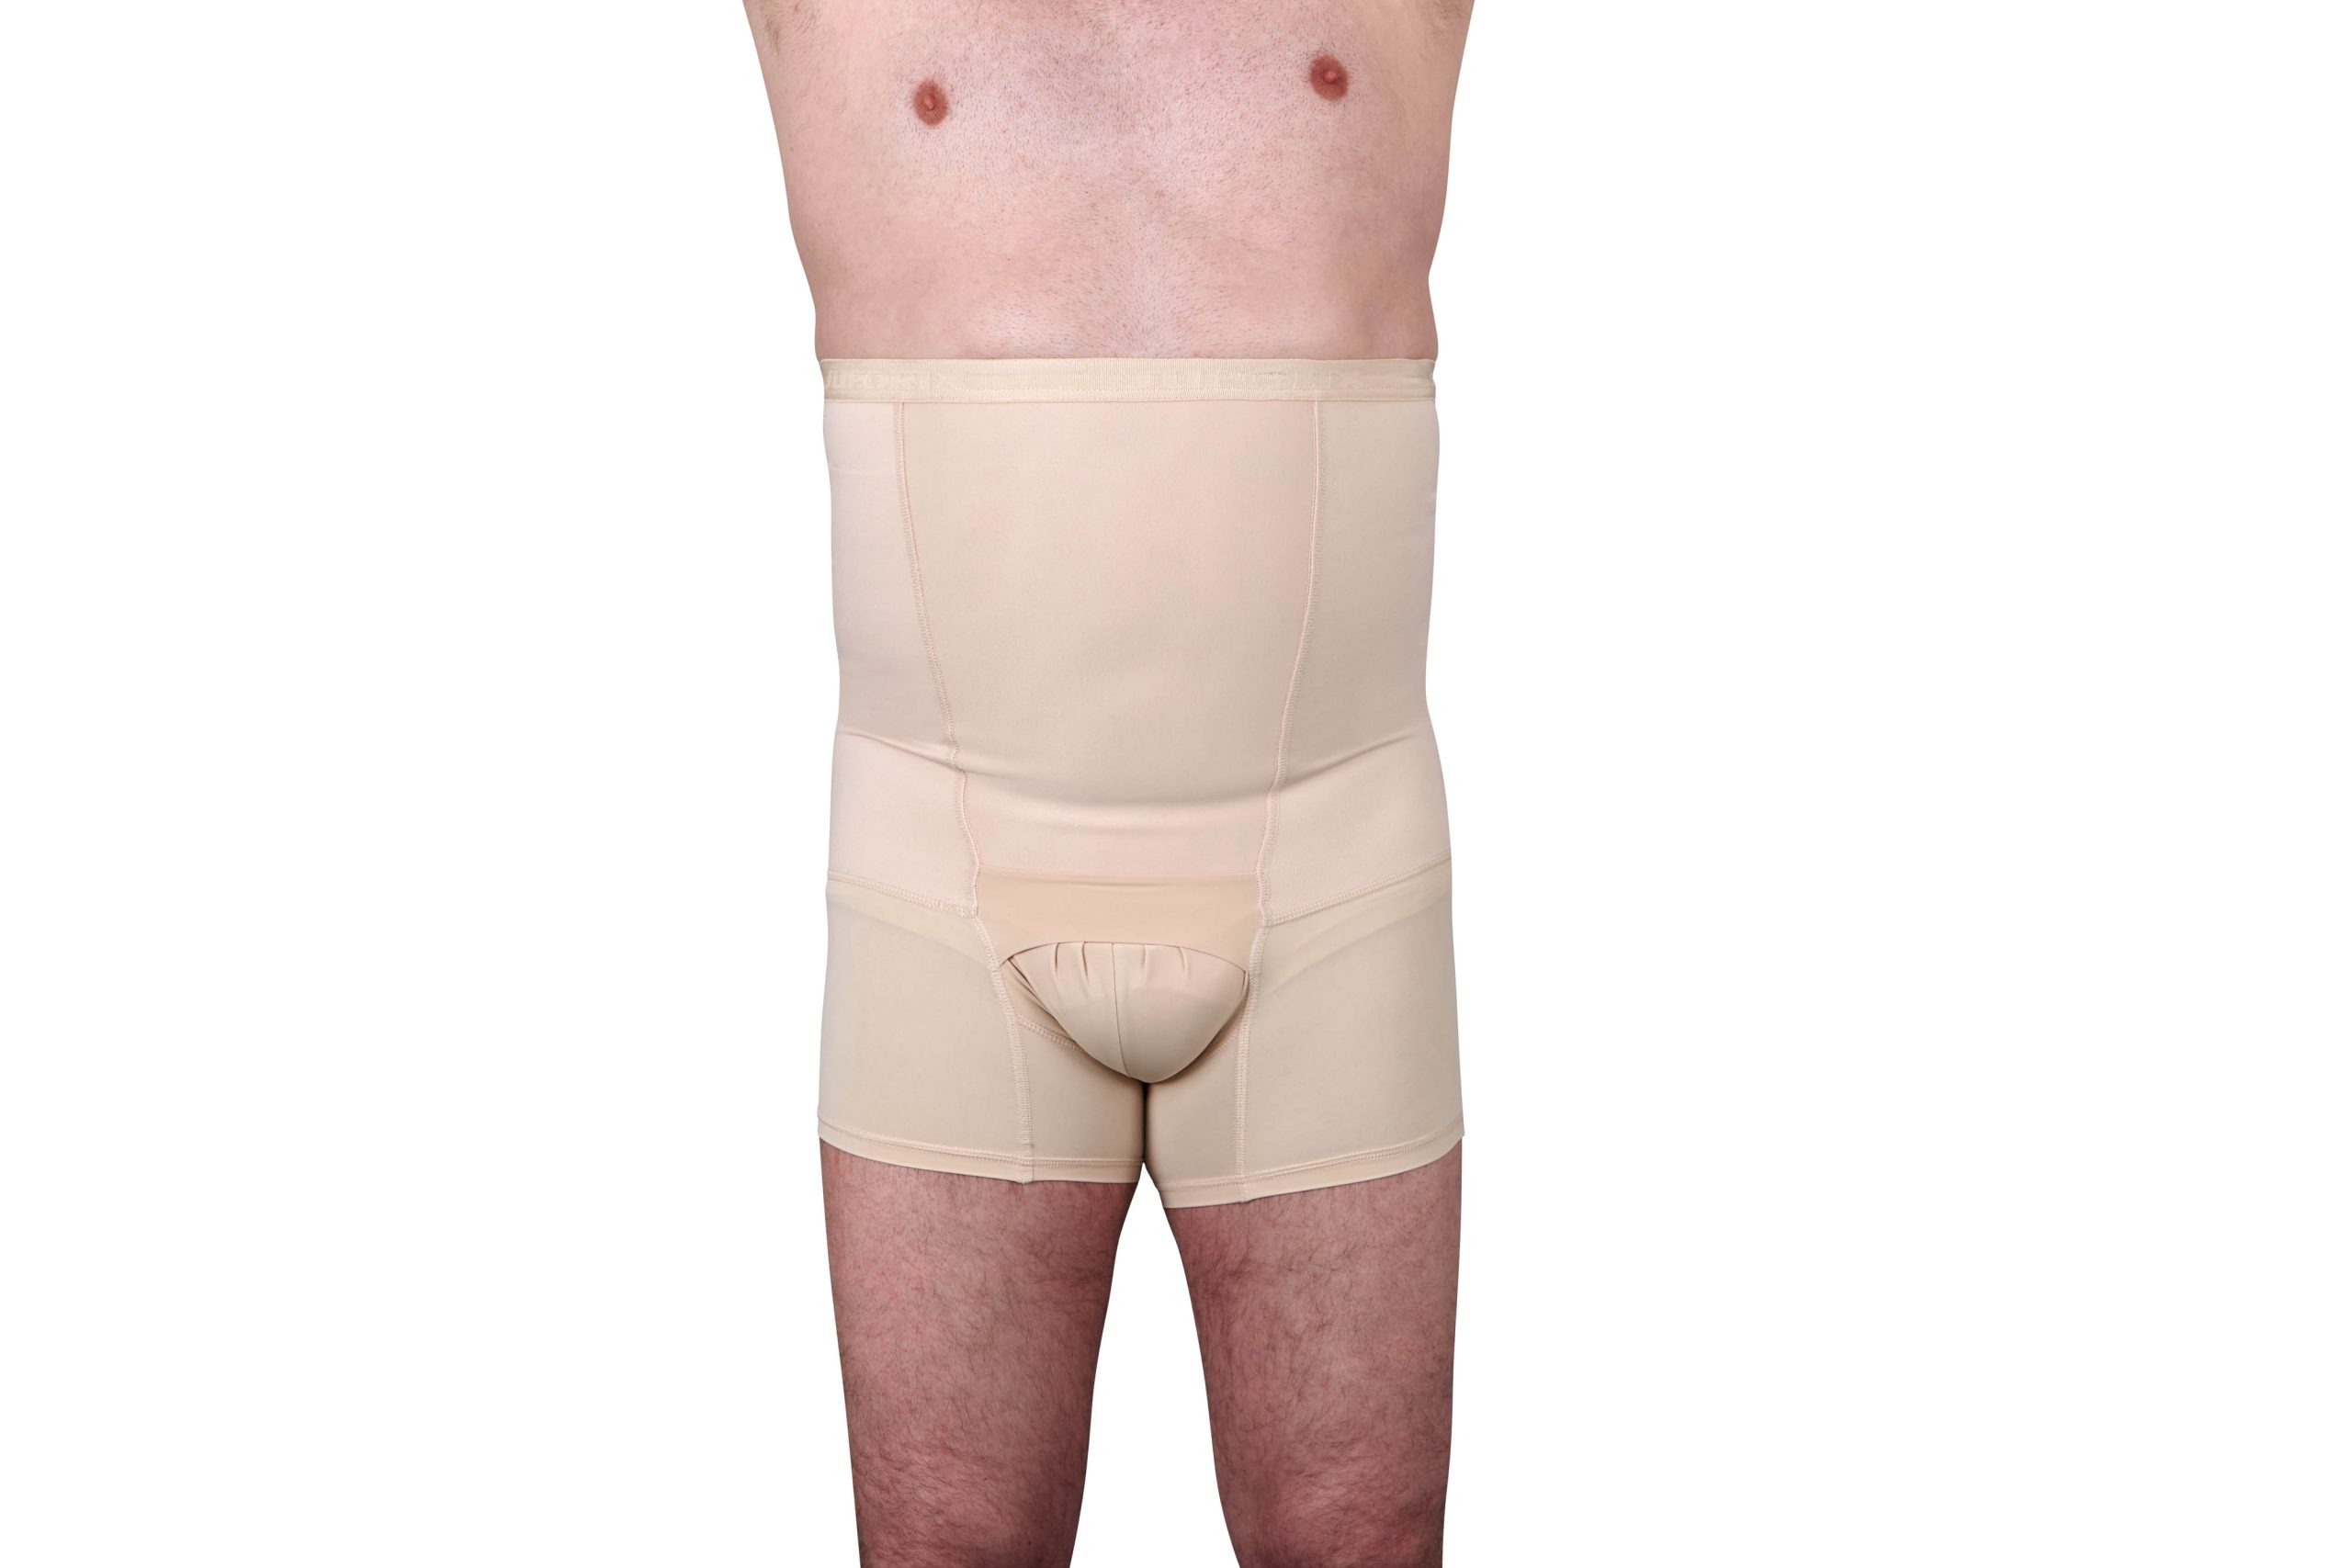  Hernia Support - Men's Underwear / Men's Clothing: Clothing,  Shoes & Jewelry